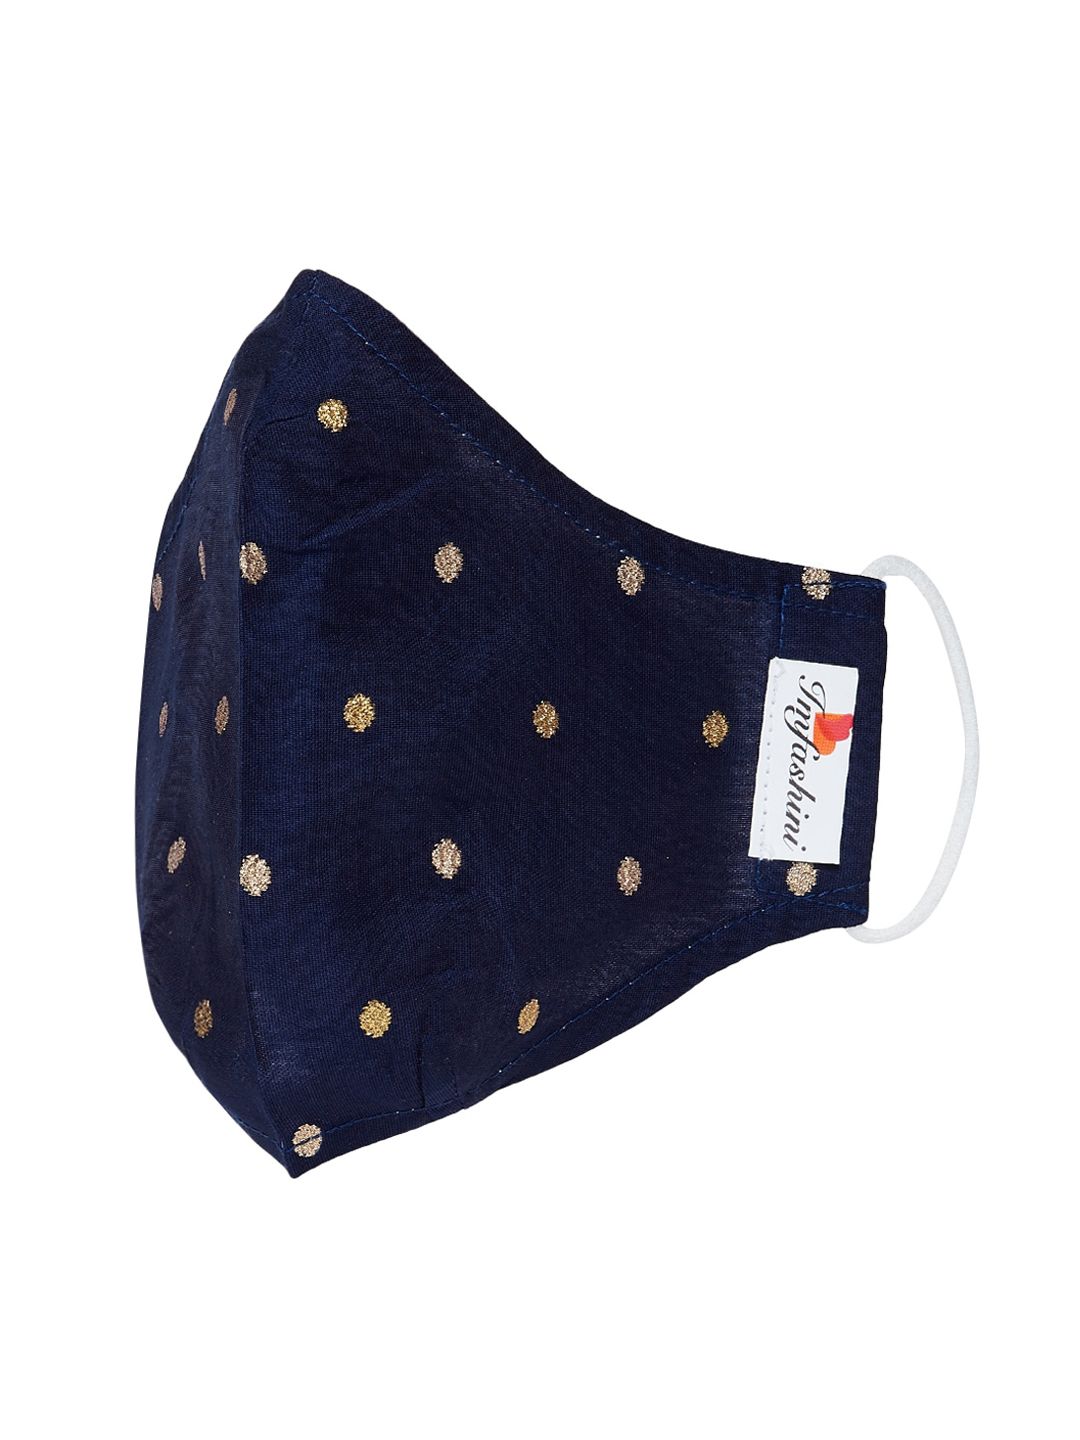 Imfashini Women Navy Blue & Gold-Coloured Embroidered 2-Ply Reusable Cloth Mask Price in India